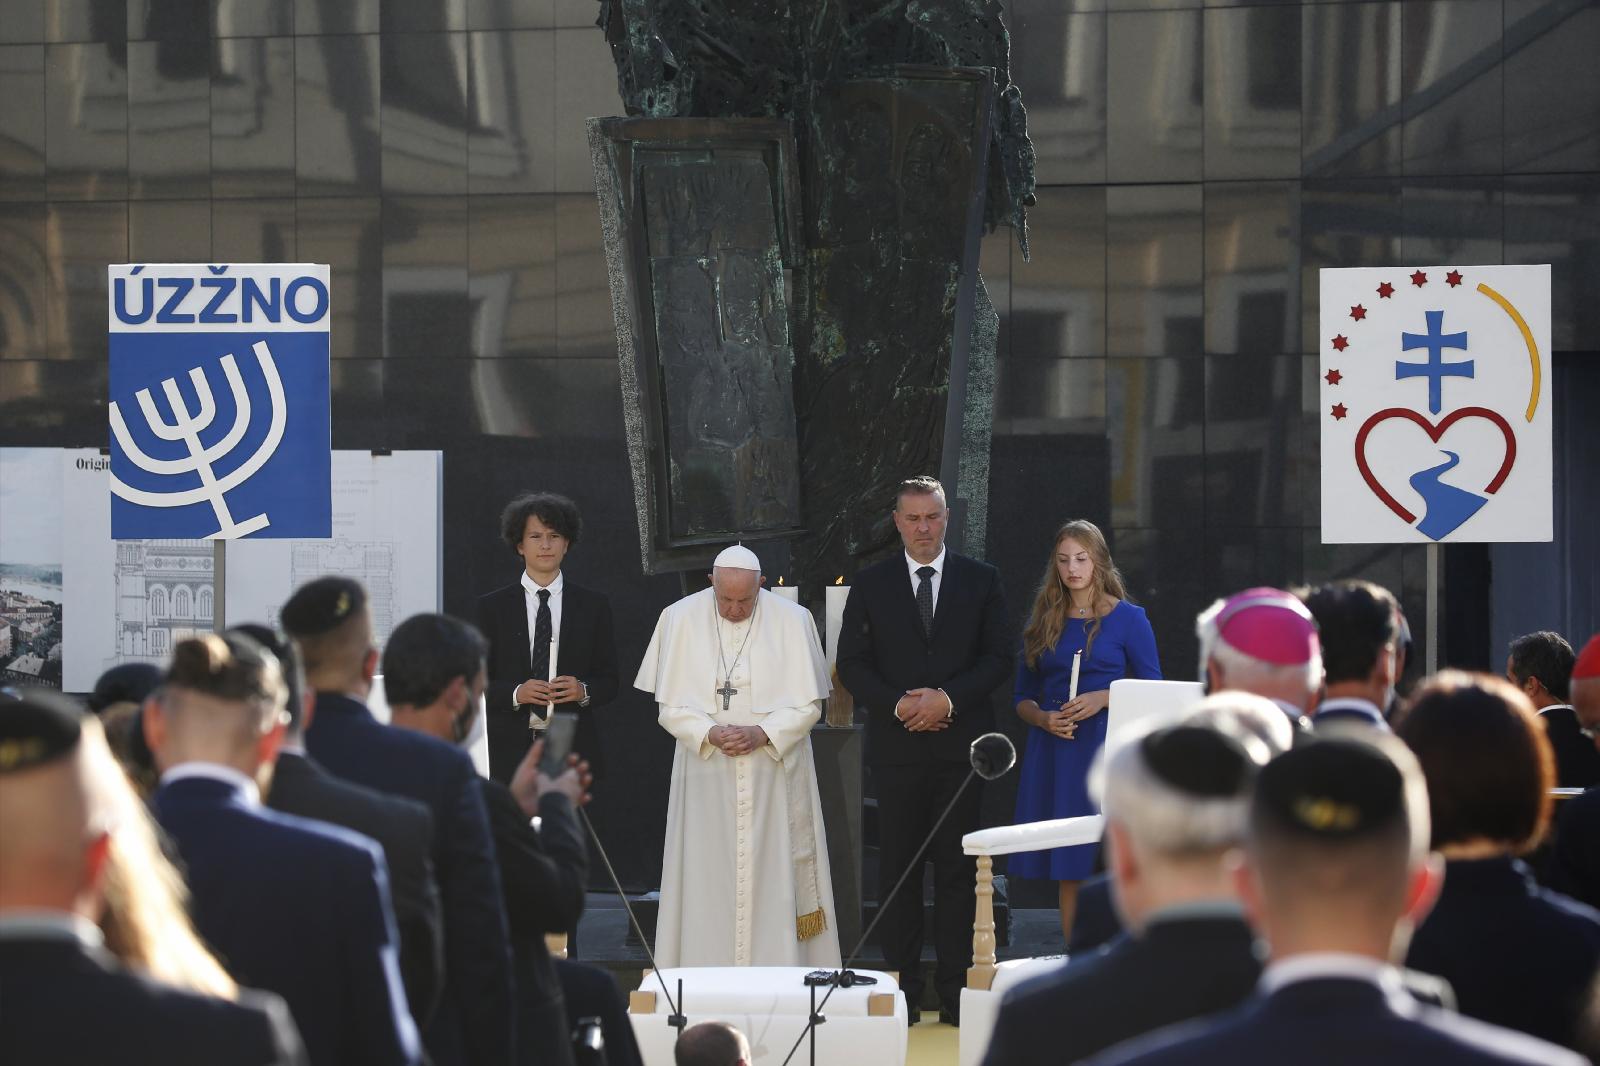 Horror of Holocaust must never be forgotten says Pope